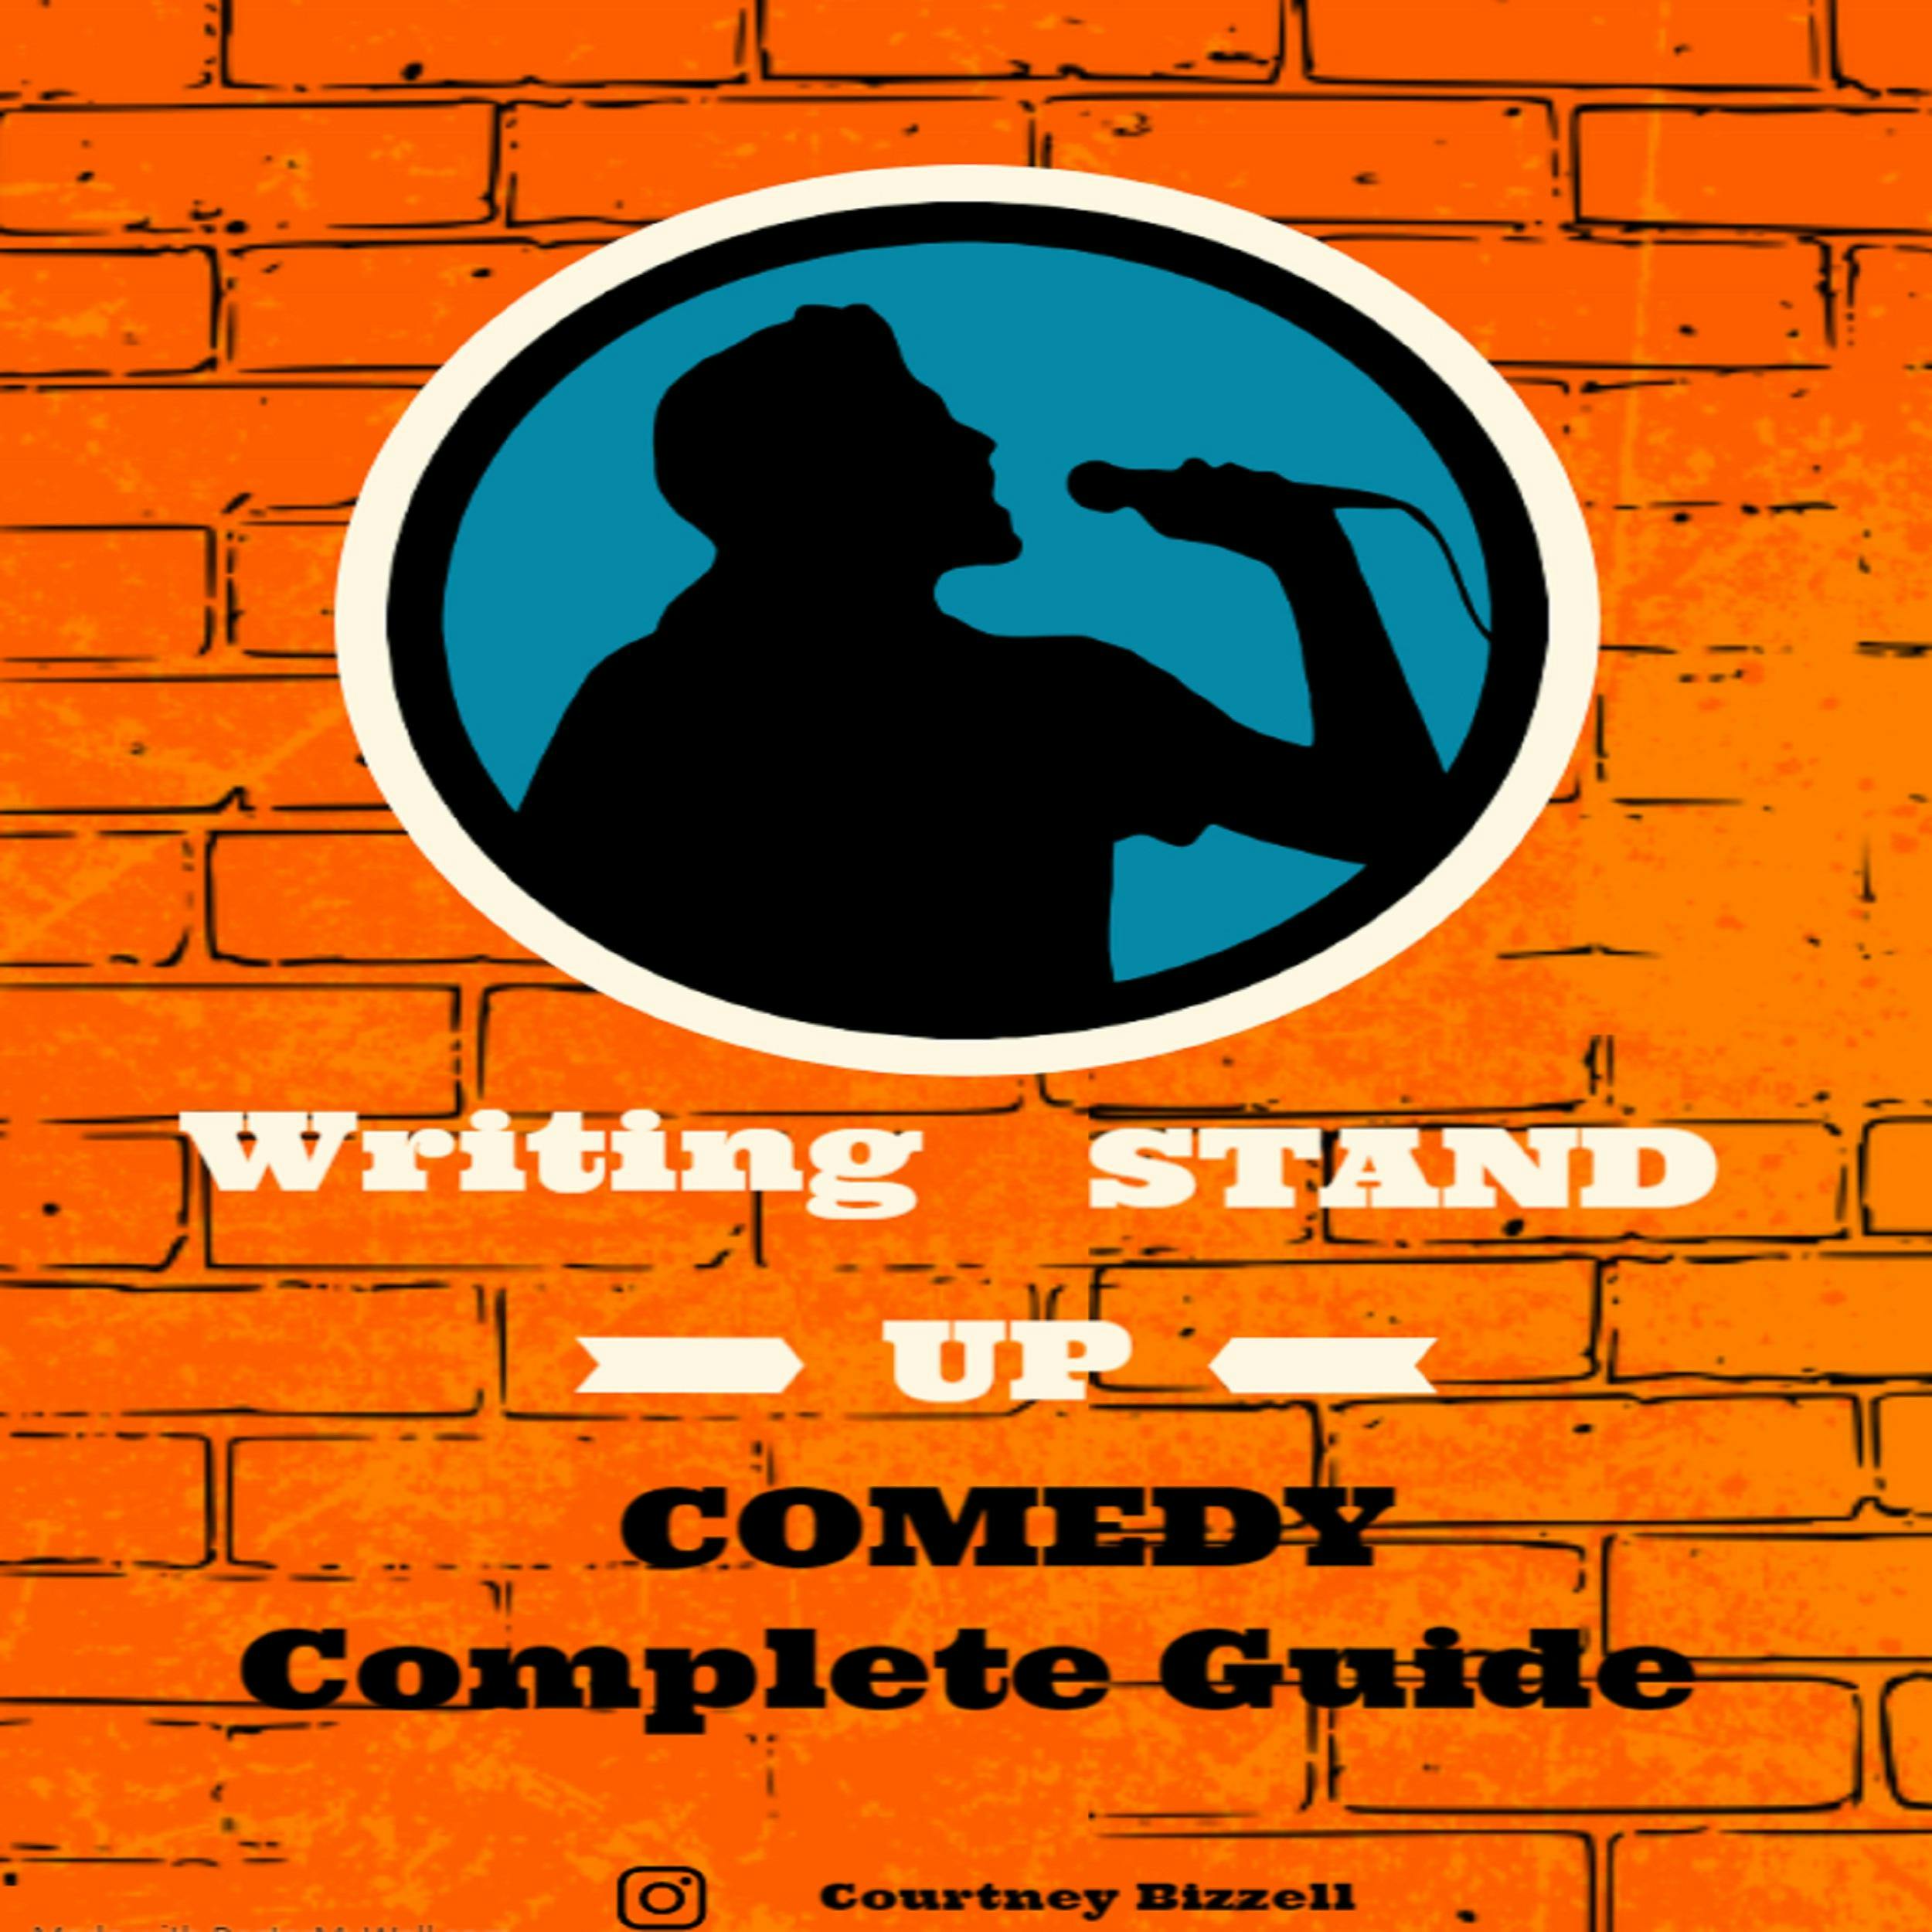 Writing Stand Up Comedy Complete Guide - Courtney Bizzell